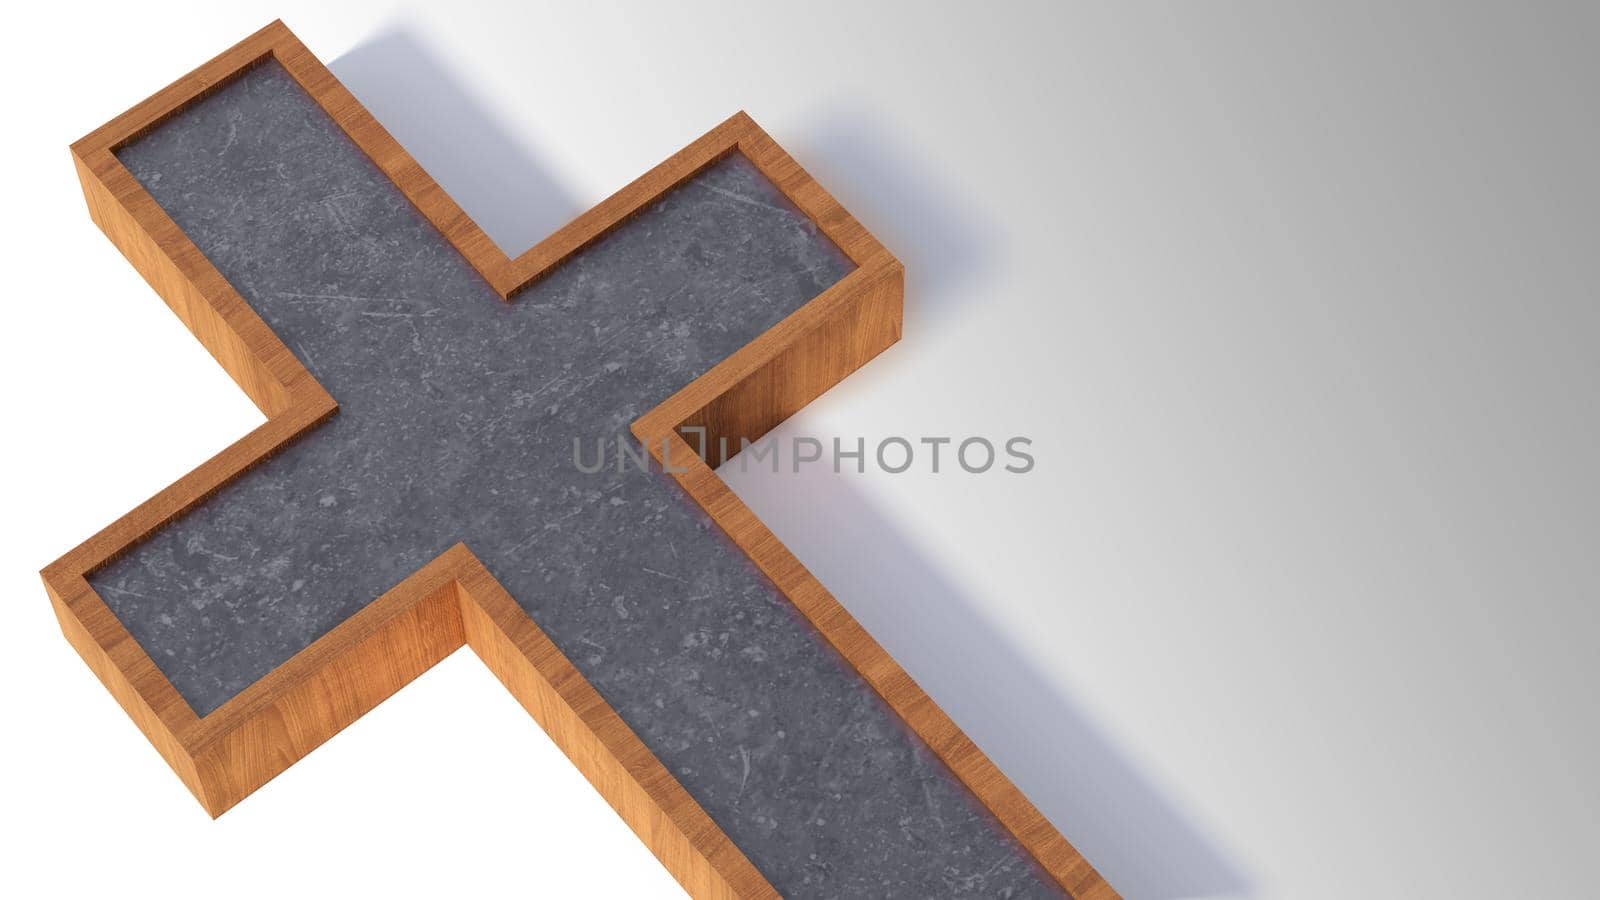 3d rendering image of Jesus cross made from steel and wire mesh steel.